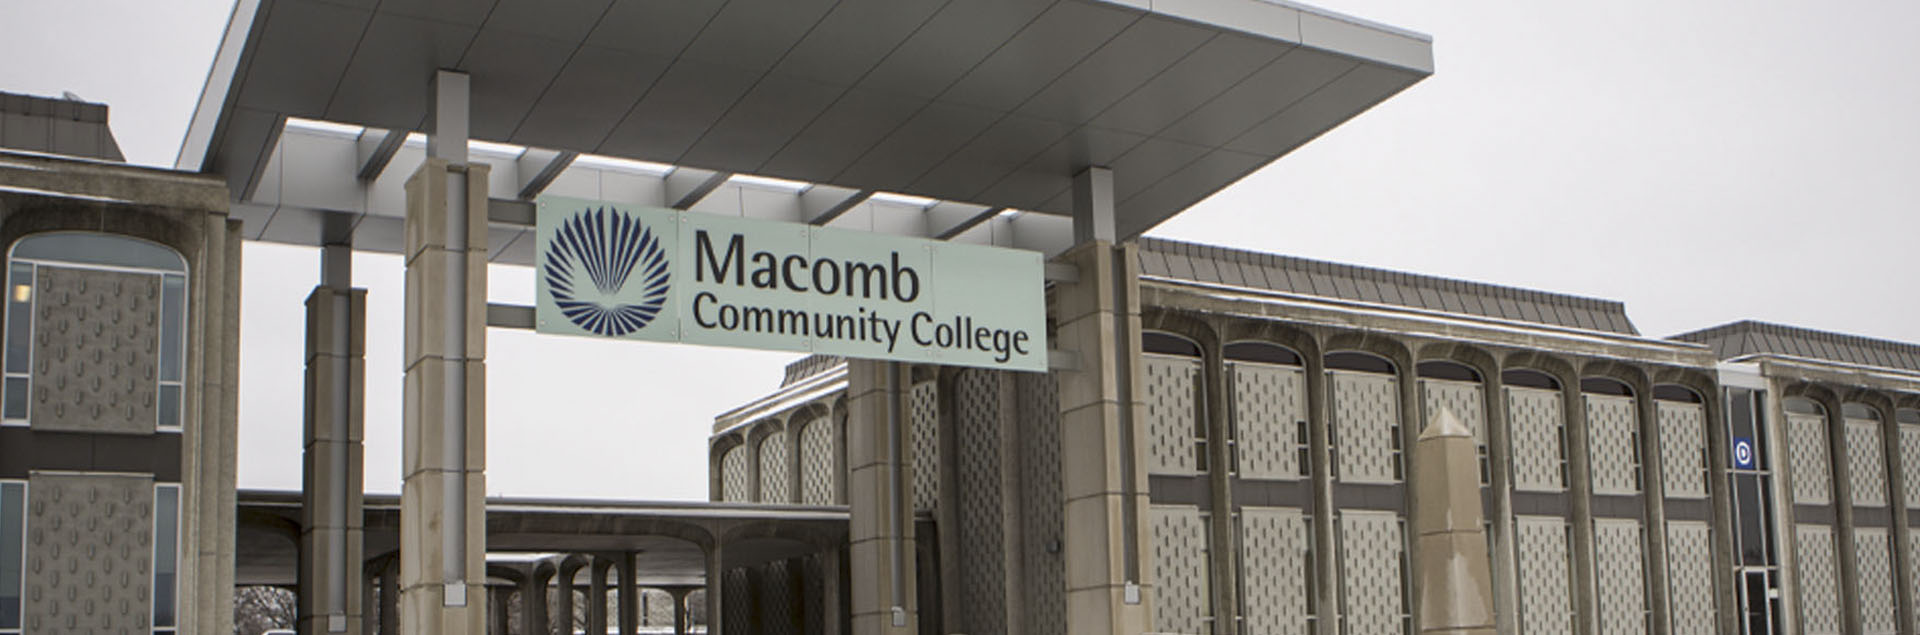 Macomb Community College South Campus